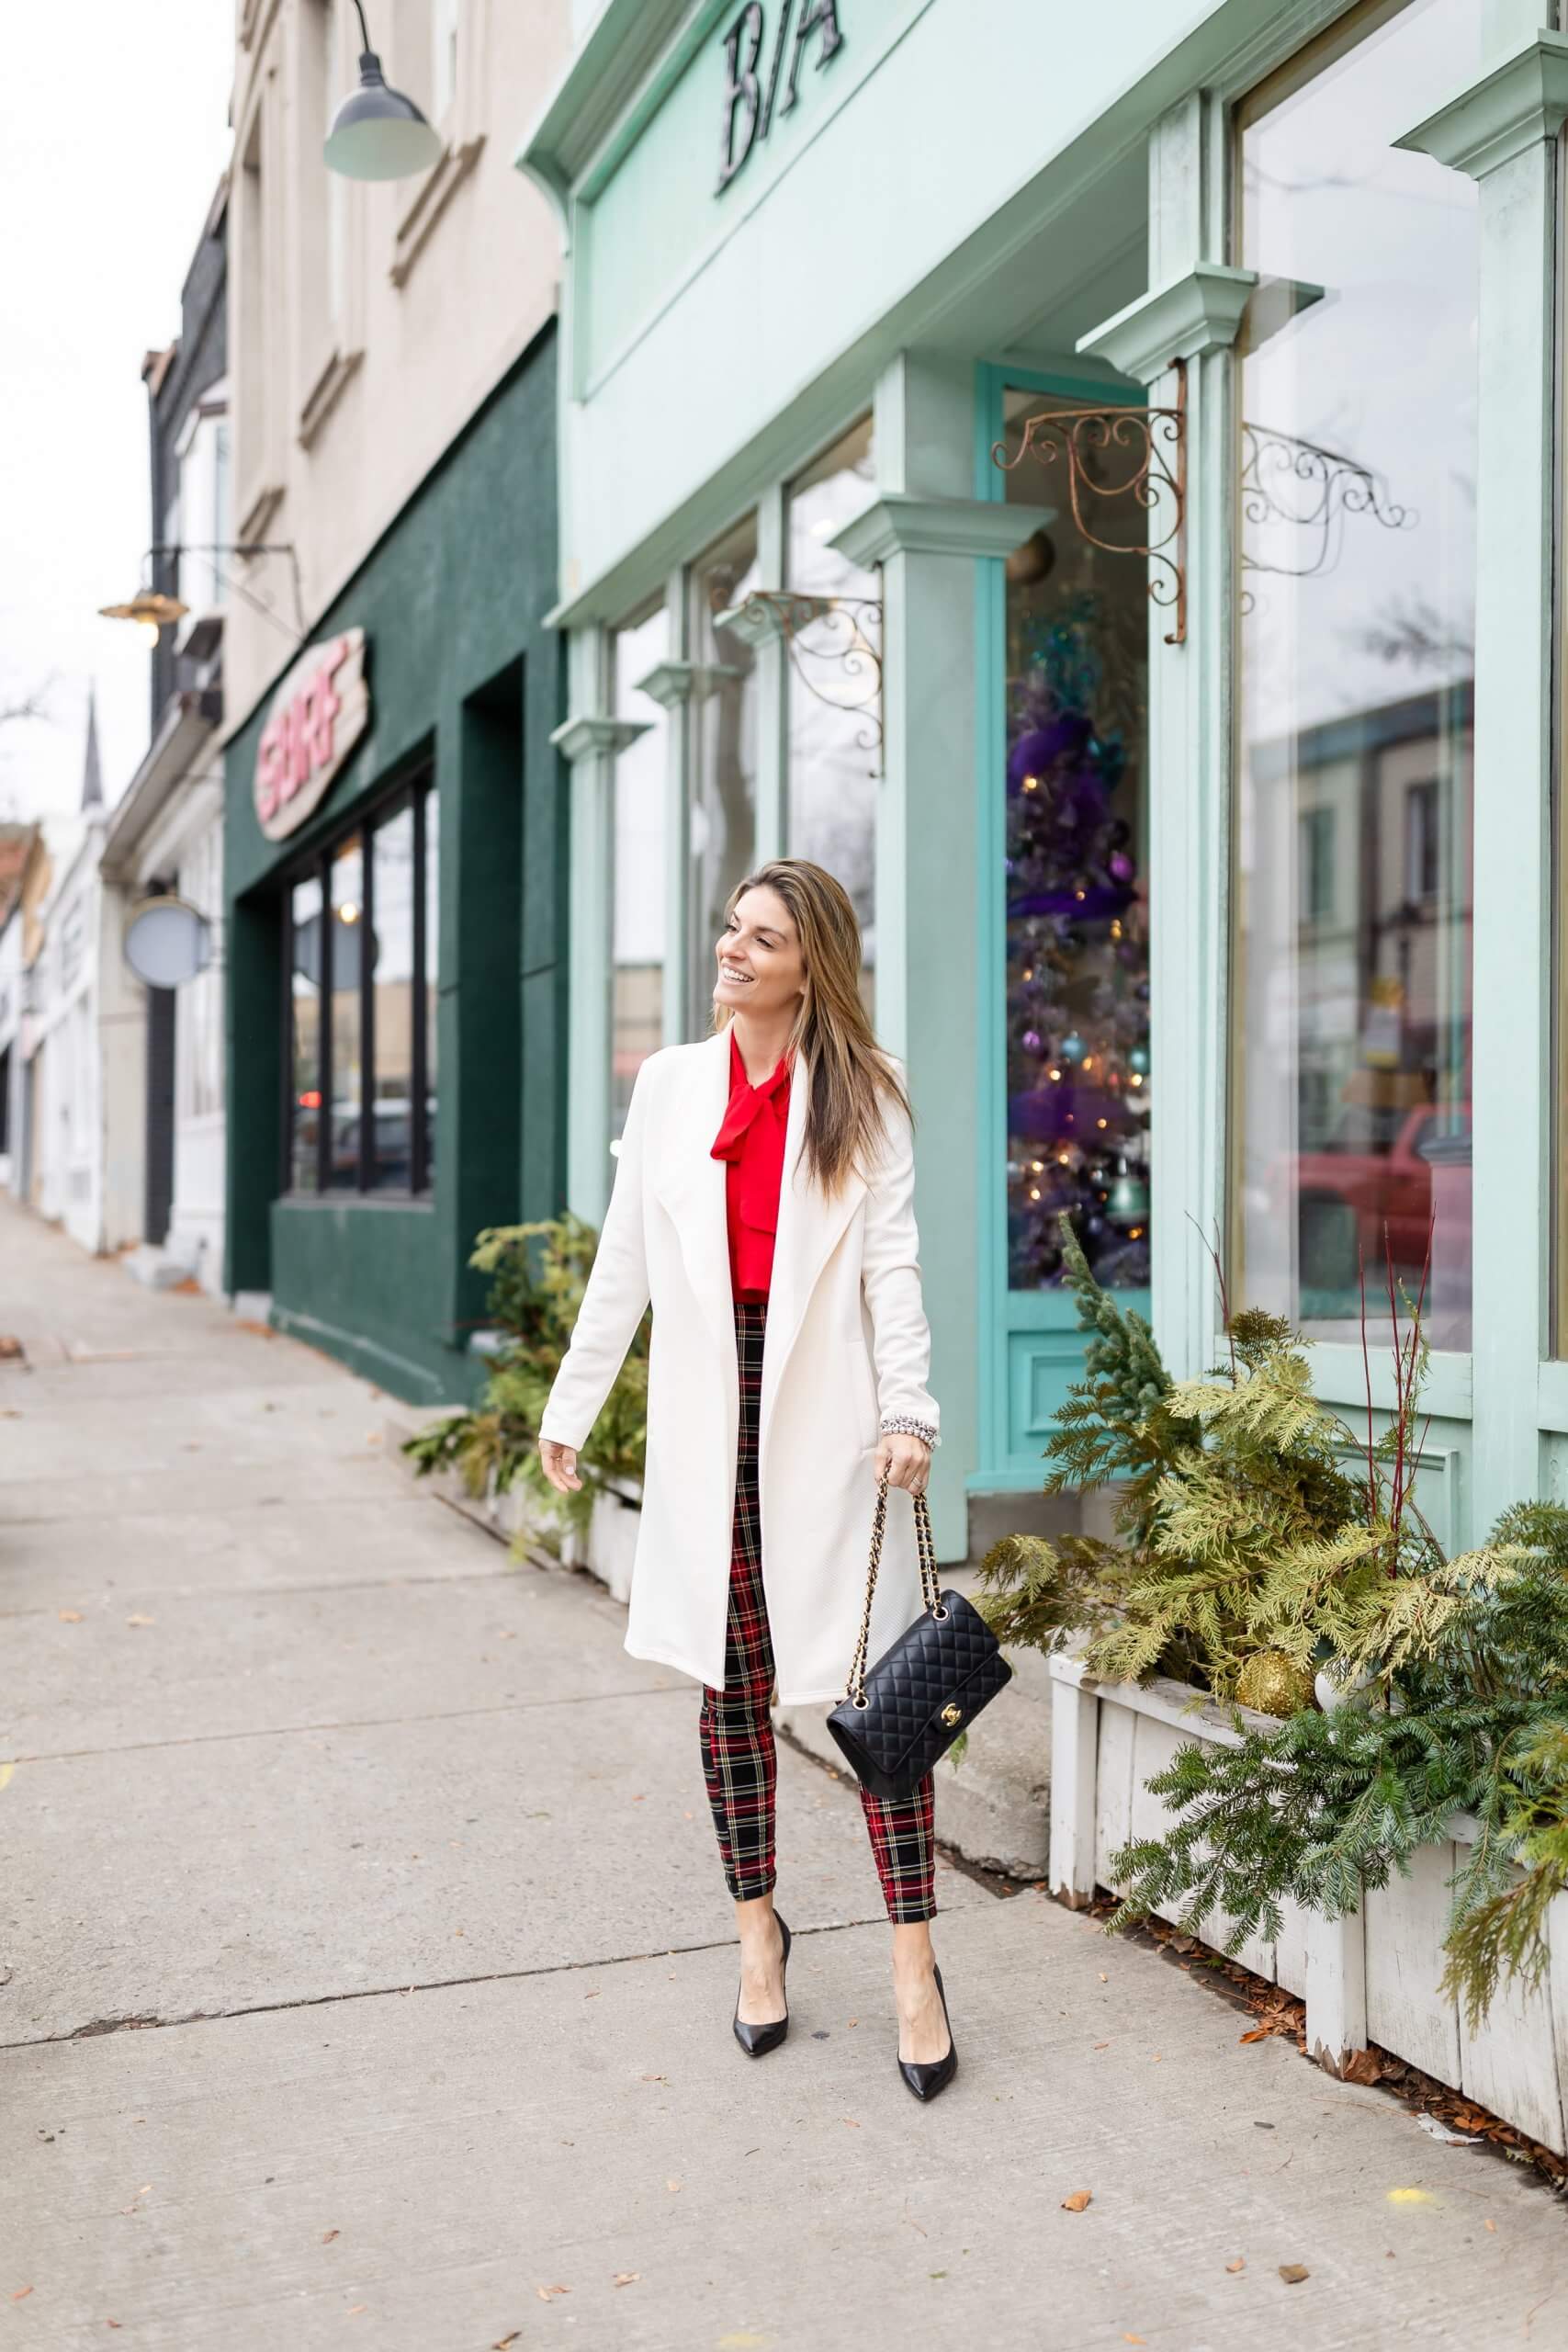 Festive look; holiday look; holiday outfit idea; plaid pants for the holidays; durham region blogger; sparkleshinylove mandy Furnis